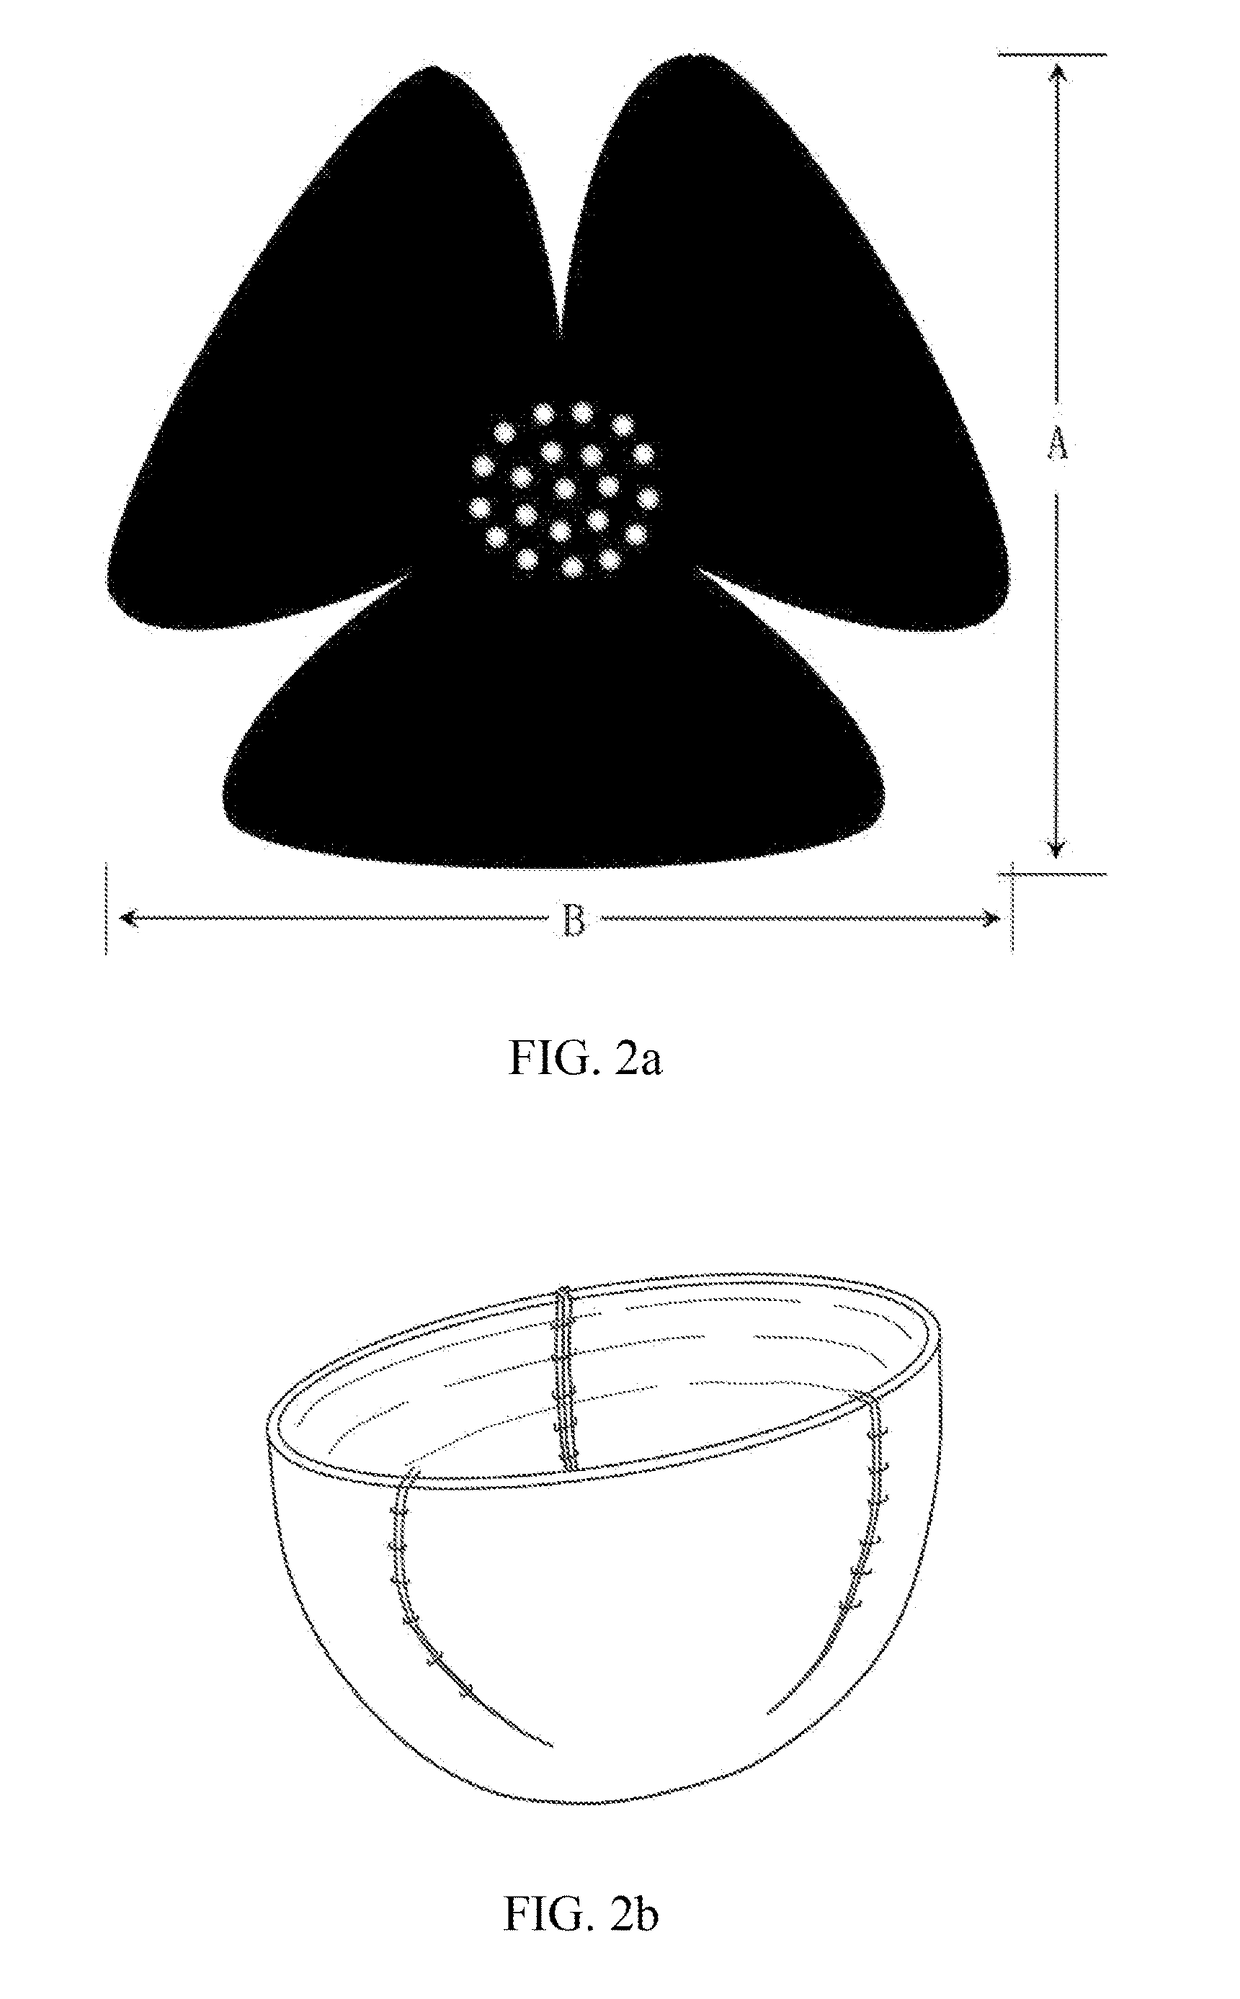 Breast prosthesis support device based on tissue matrix material, and preparation method therefor